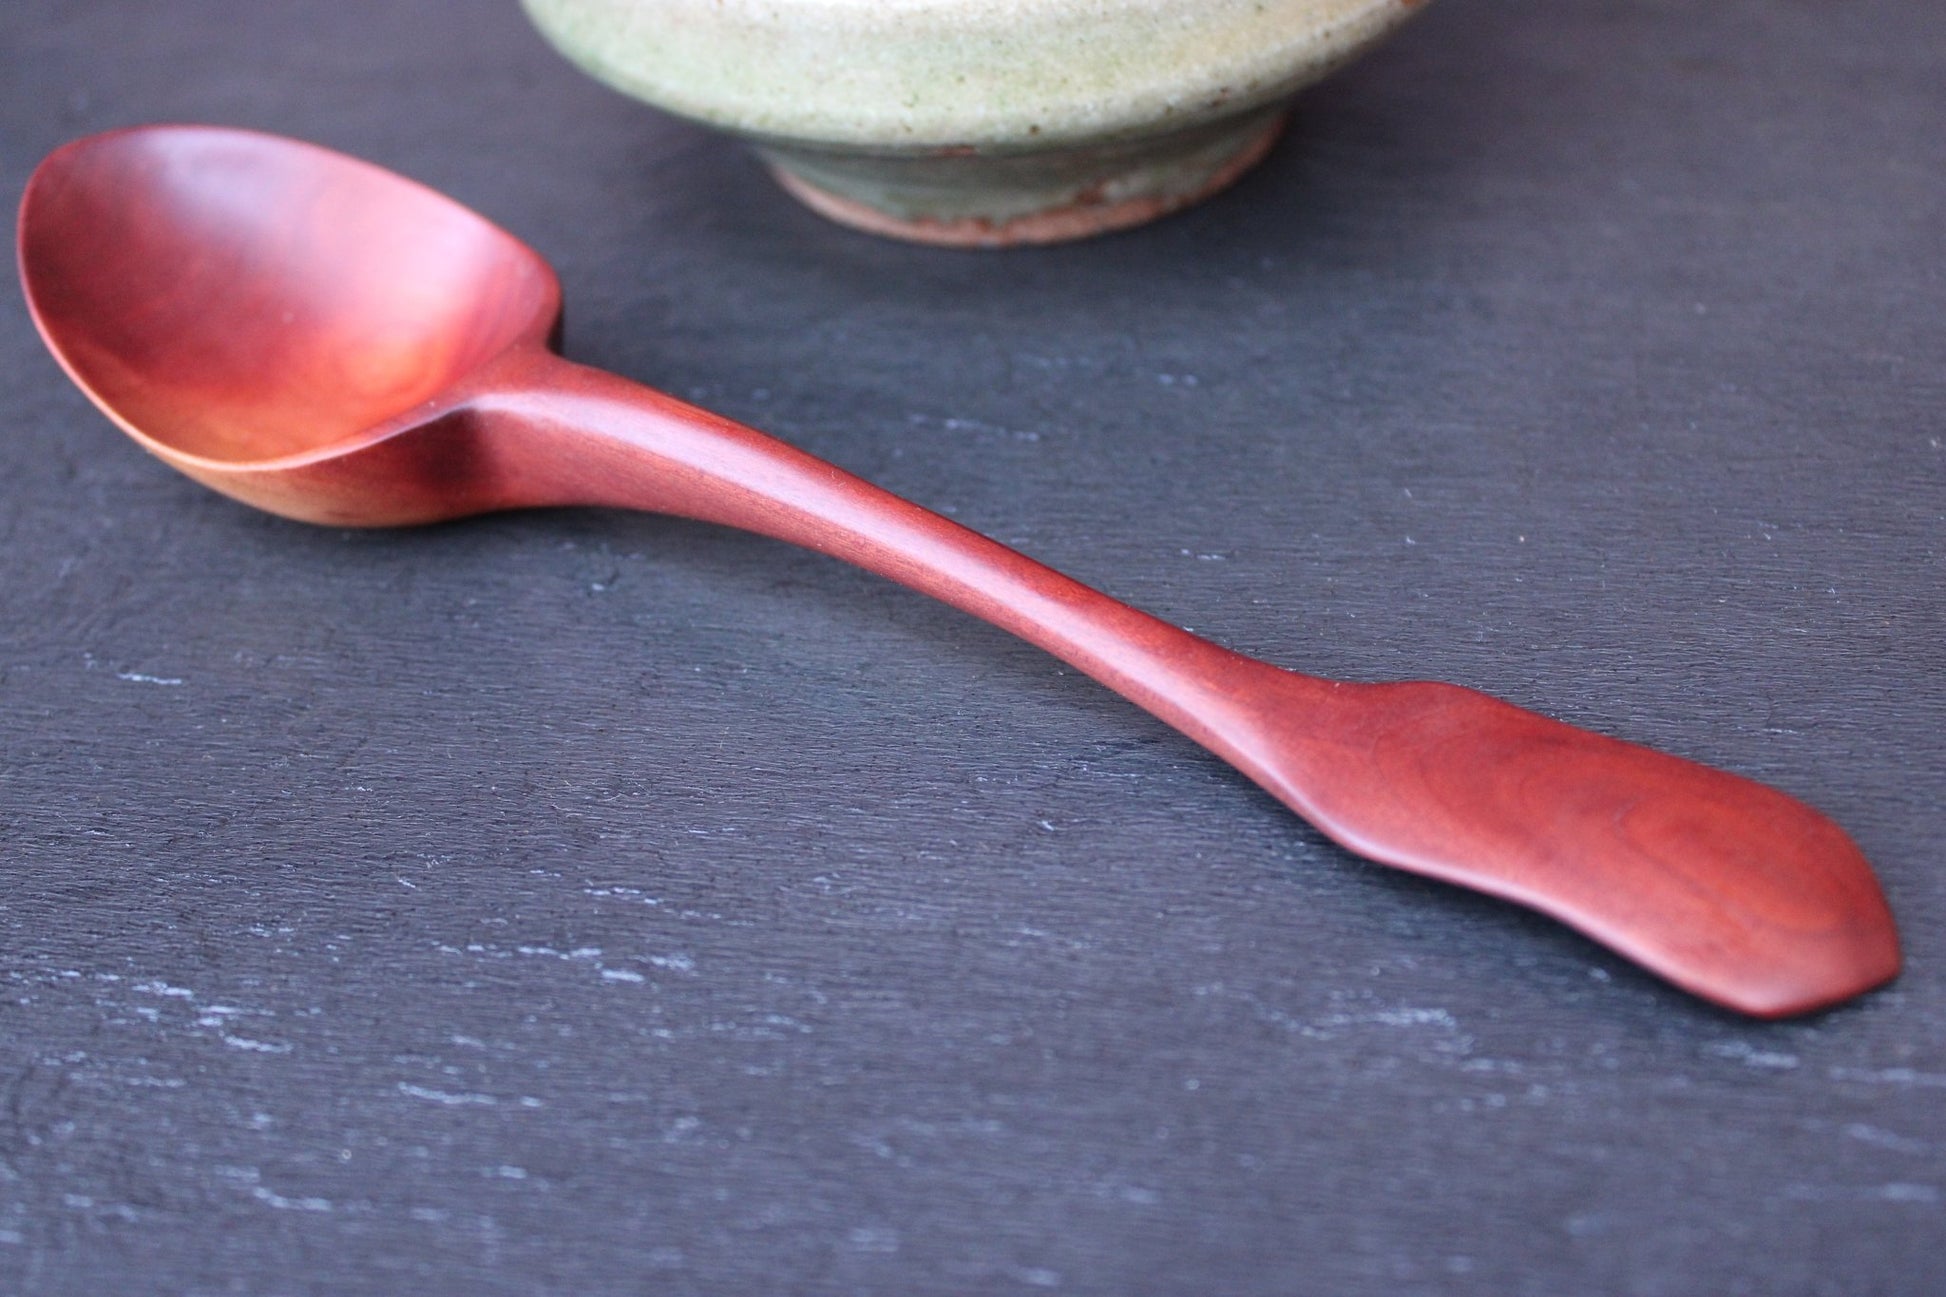 Manzanita Eating Spoon ~ Hand Carved ~ Sustainably Sourced Native Wood - Blue Sage Family Farm